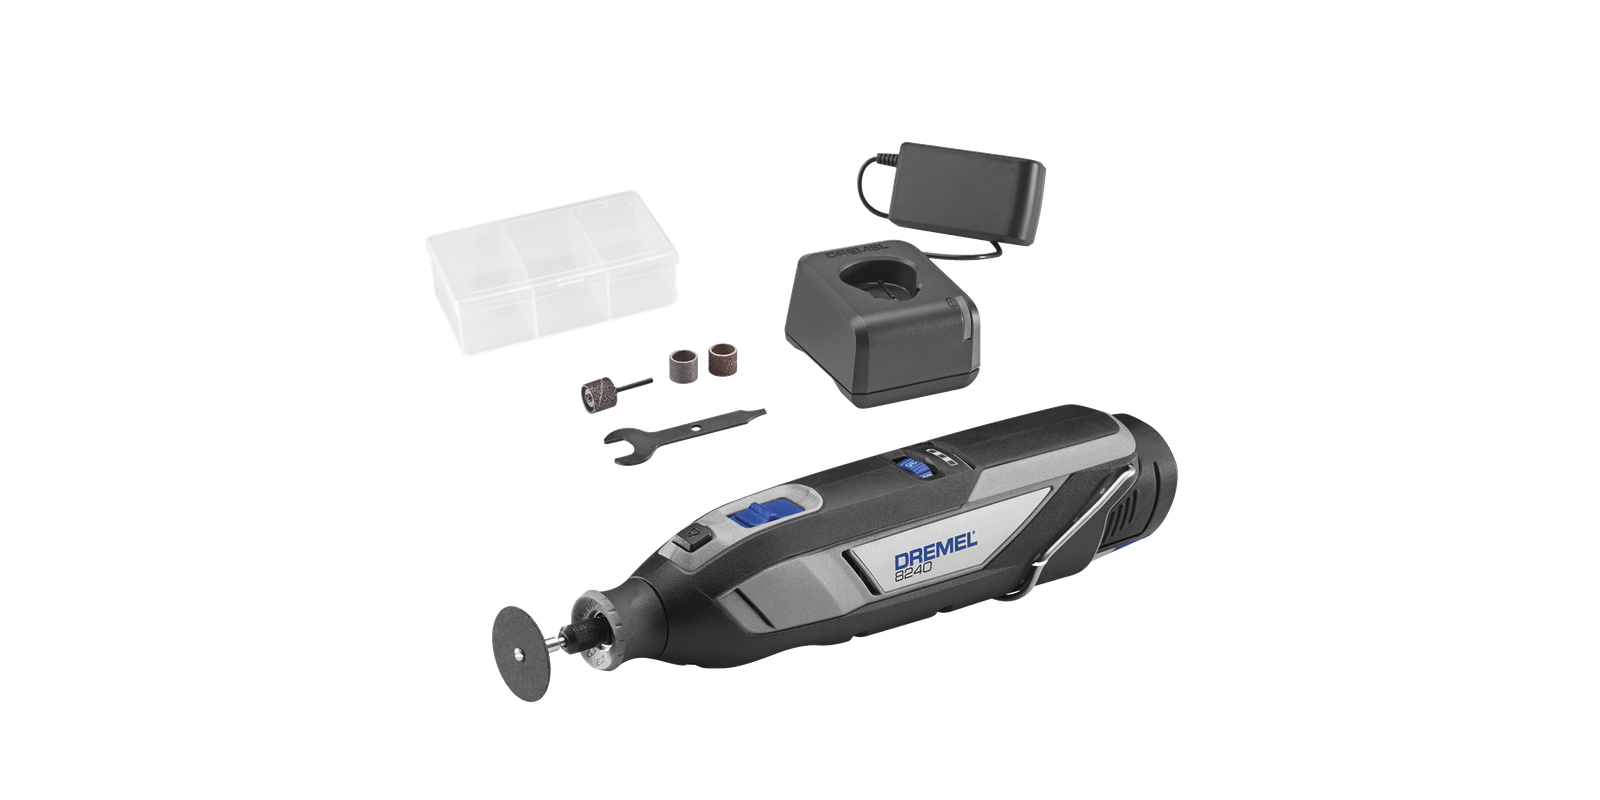 Dremel Launches Its First Smart Rotary Tool - Here's The Dremel 8260 -  Stuff South Africa